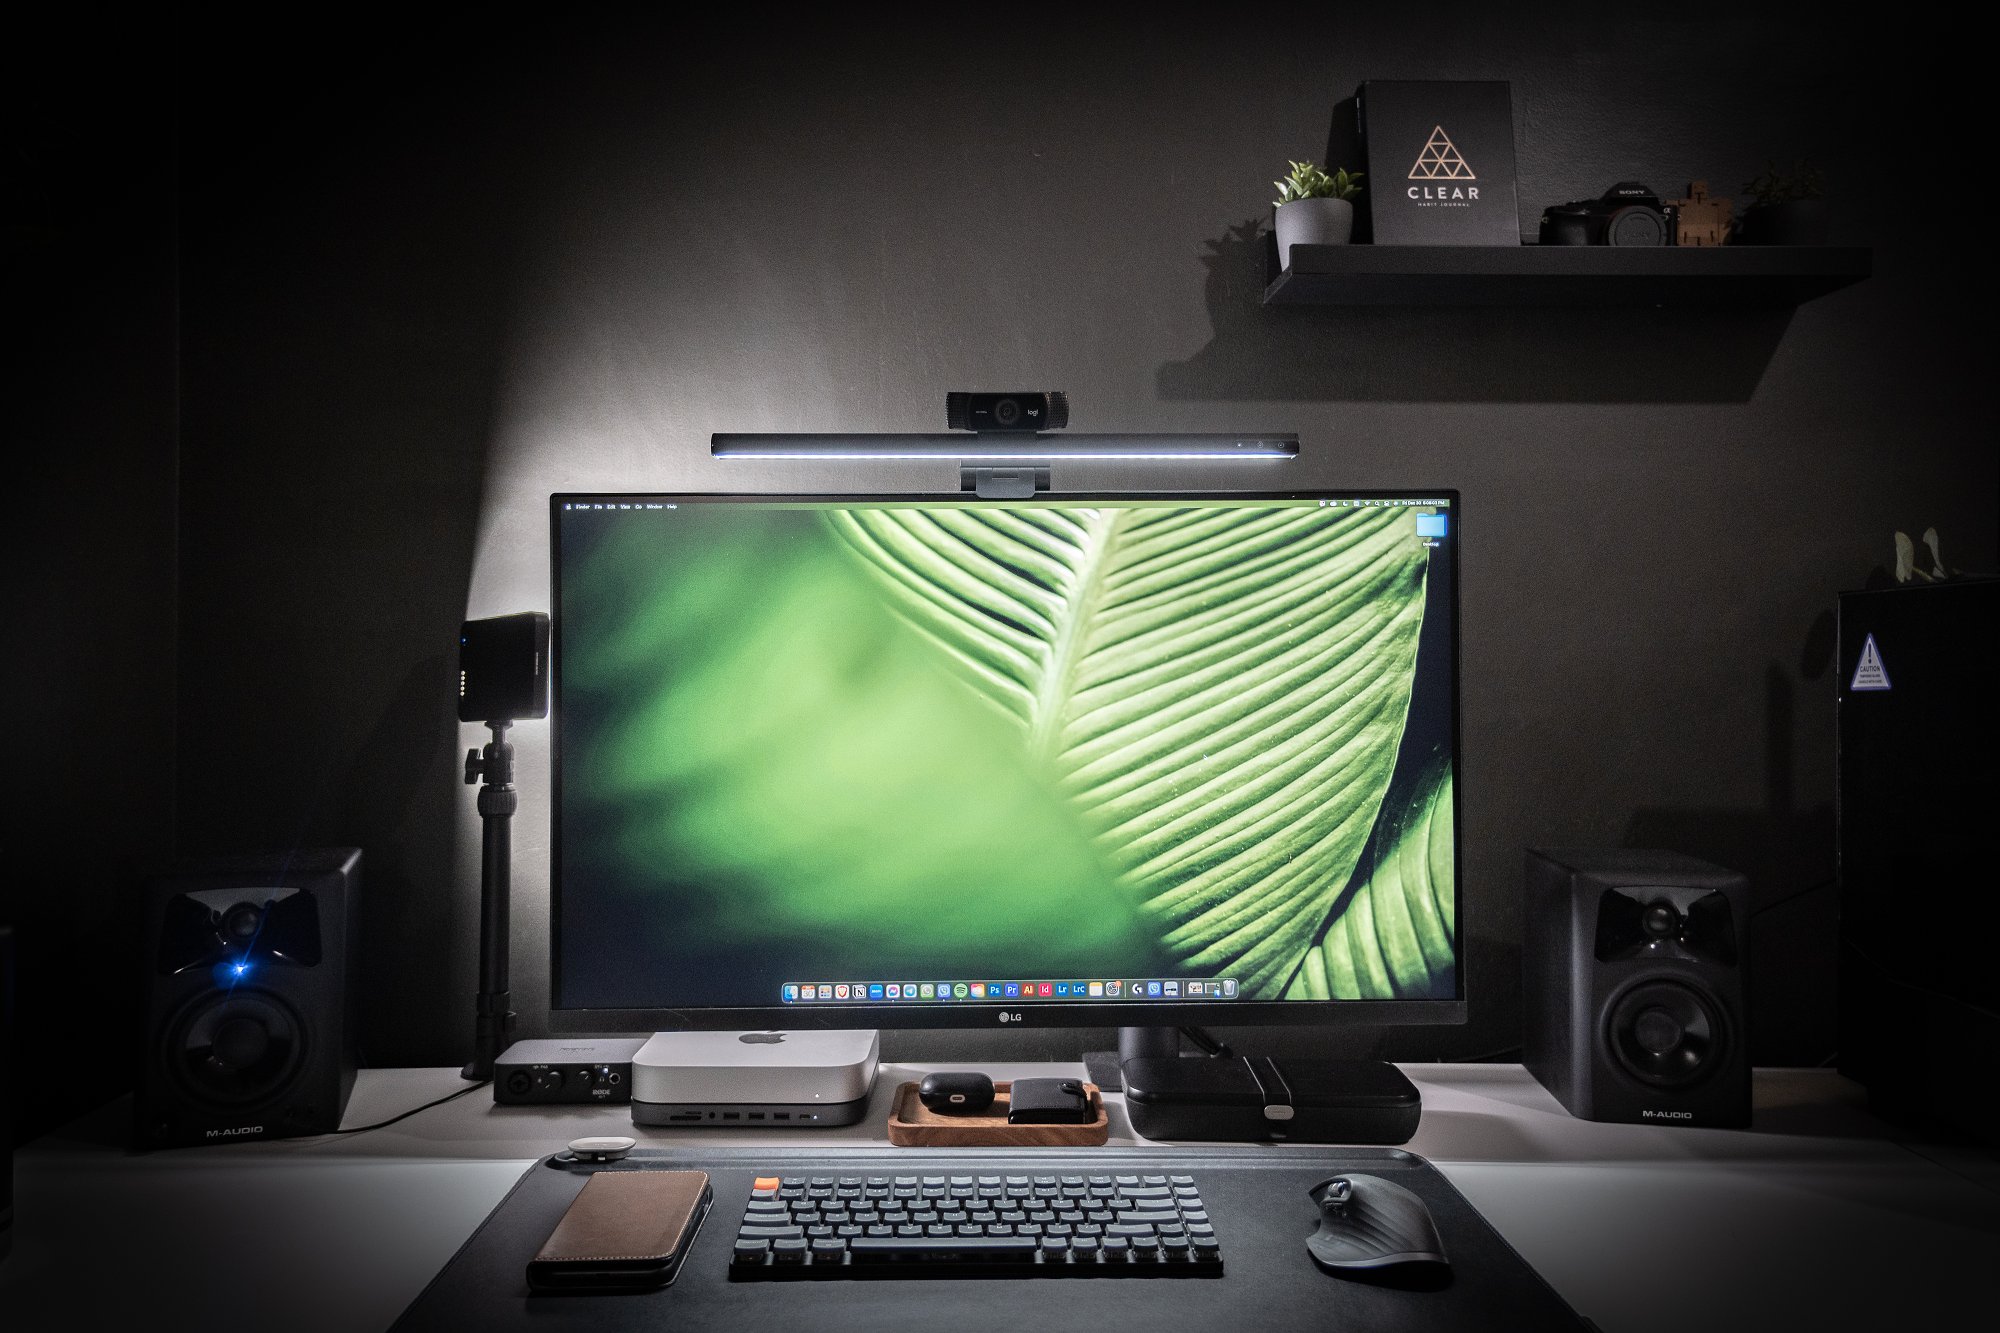 A modern minimalist desk setup with a large monitor, studio speakers, a sound interface, and stylish desktop accessories, all placed on a clean white desk against a dark wall with a decorative shelf above